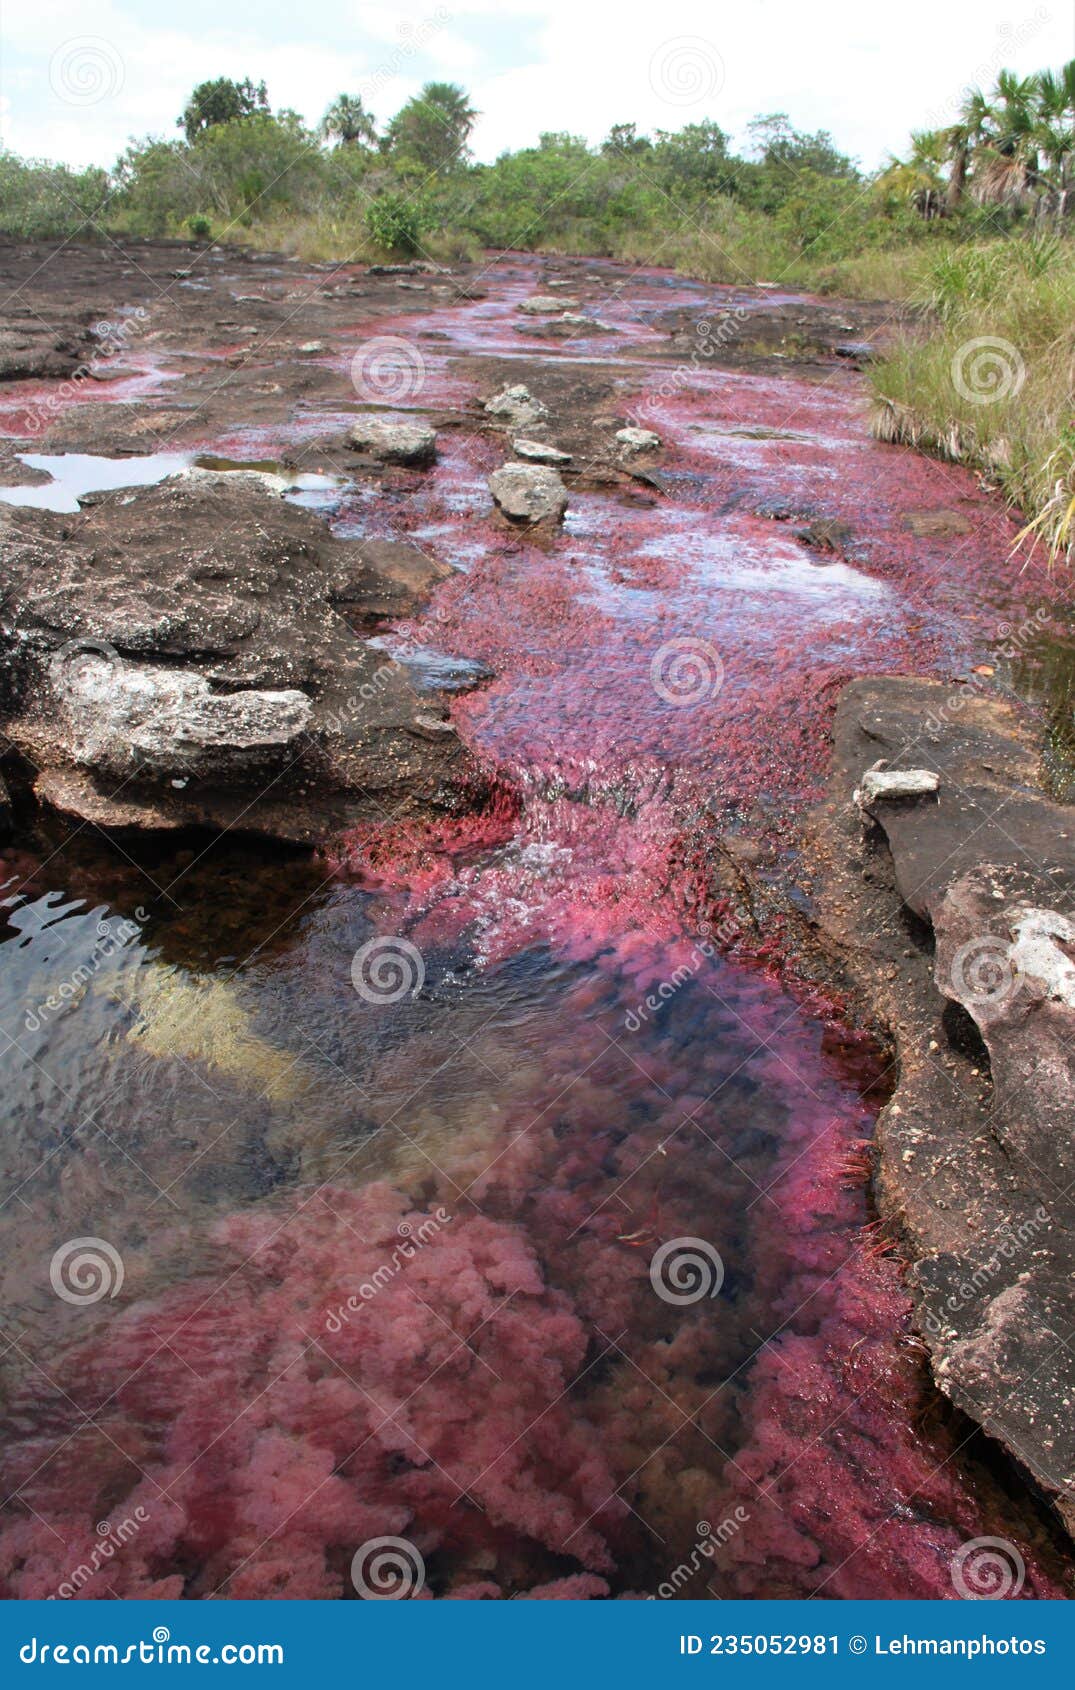 pink river cano cristales